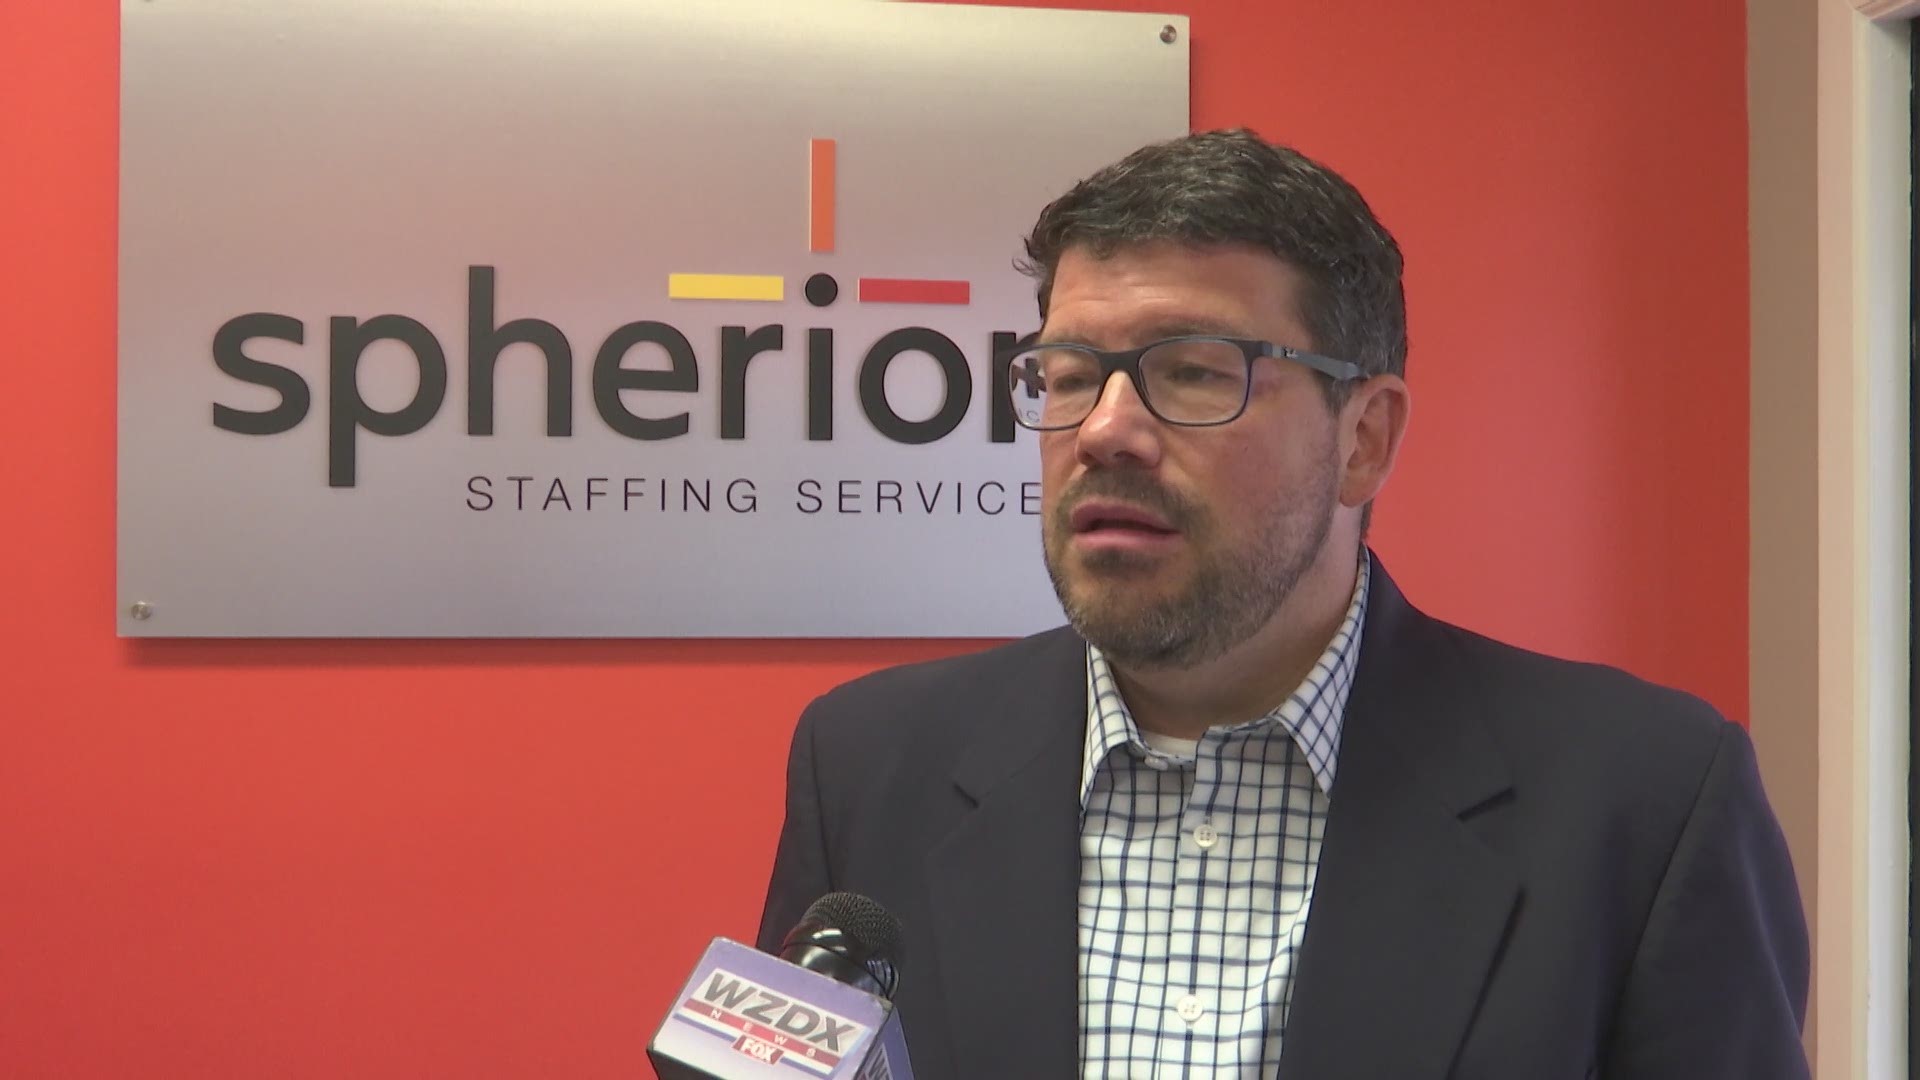 Spherion, a staffing company, says there is a demand right now for temporary workers in North Alabama.